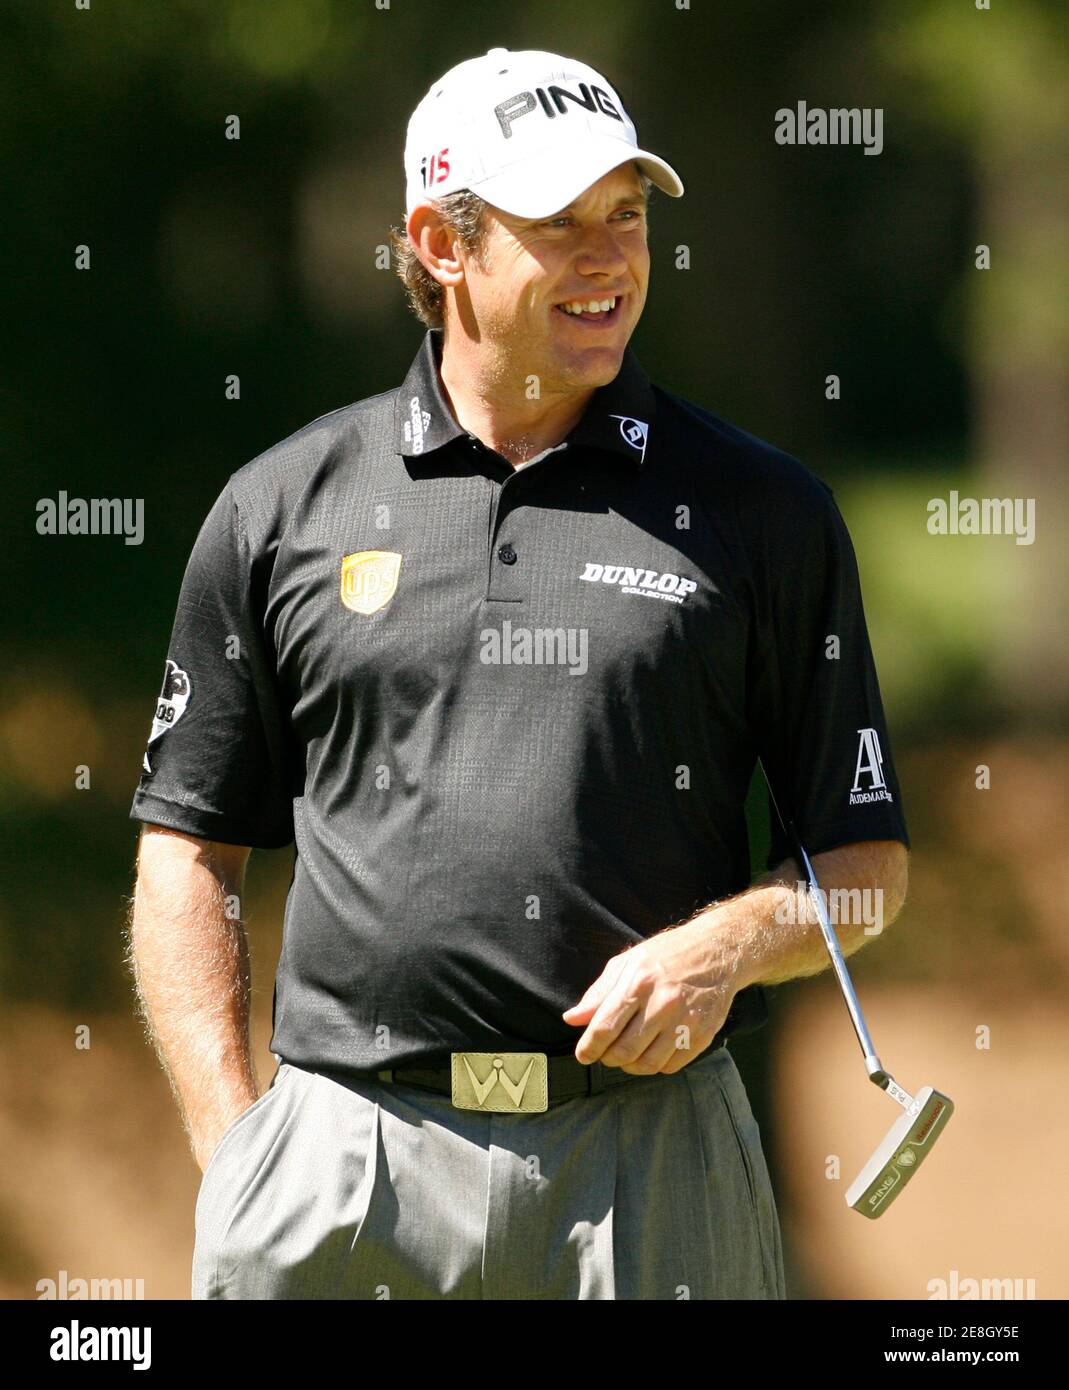 Lee Westwood smiles at the tenth green during his Pro-Am round Wednesday at the Quail Hollow Championship in Charlotte, North Carolina April 28, 2010. REUTERS/Jason Miczek (UNITED STATES - Tags: SPORT GOLF) Stock Photo